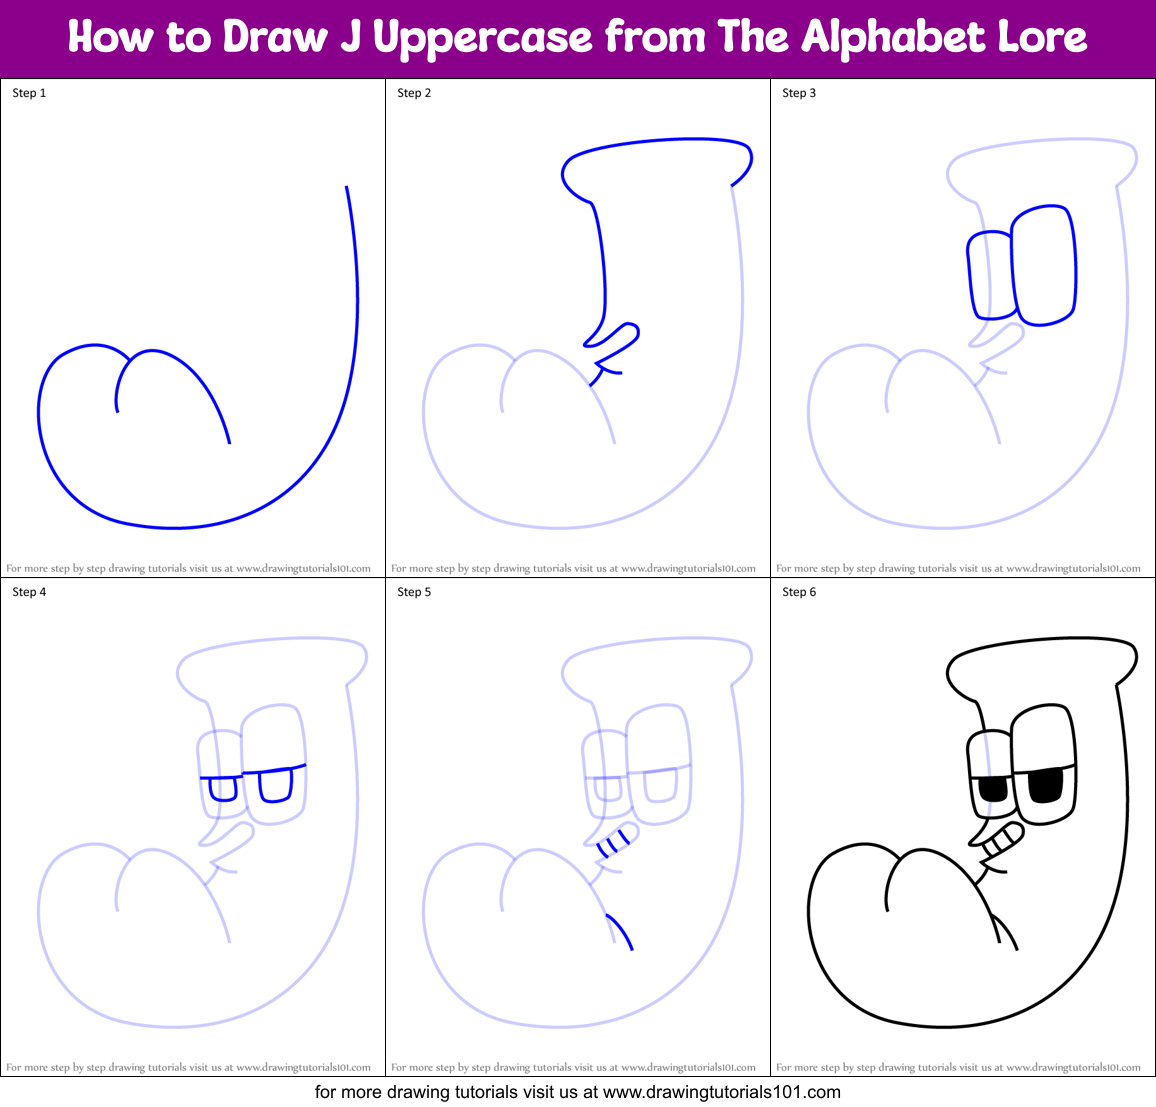 How To Draw Alphabet Lore - MAP  Easy Step By Step Drawing Tutorial 